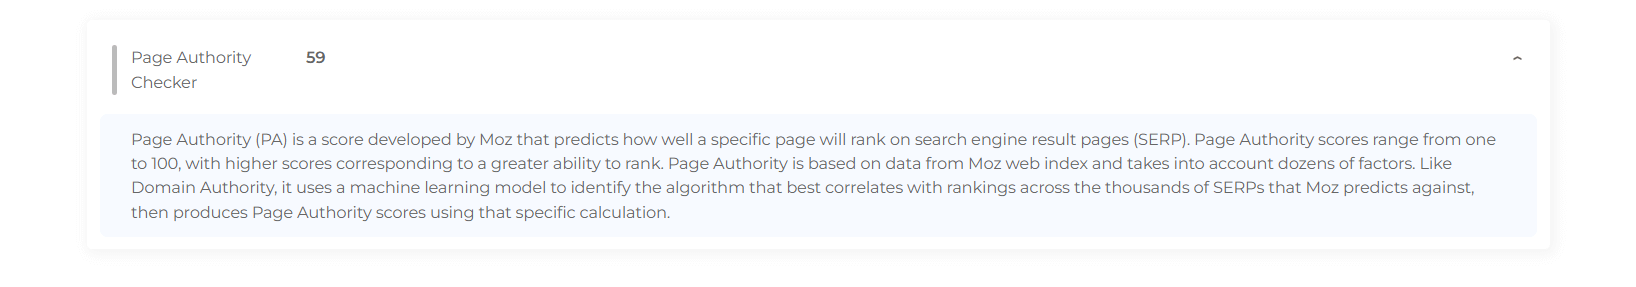 Page Authority checker result